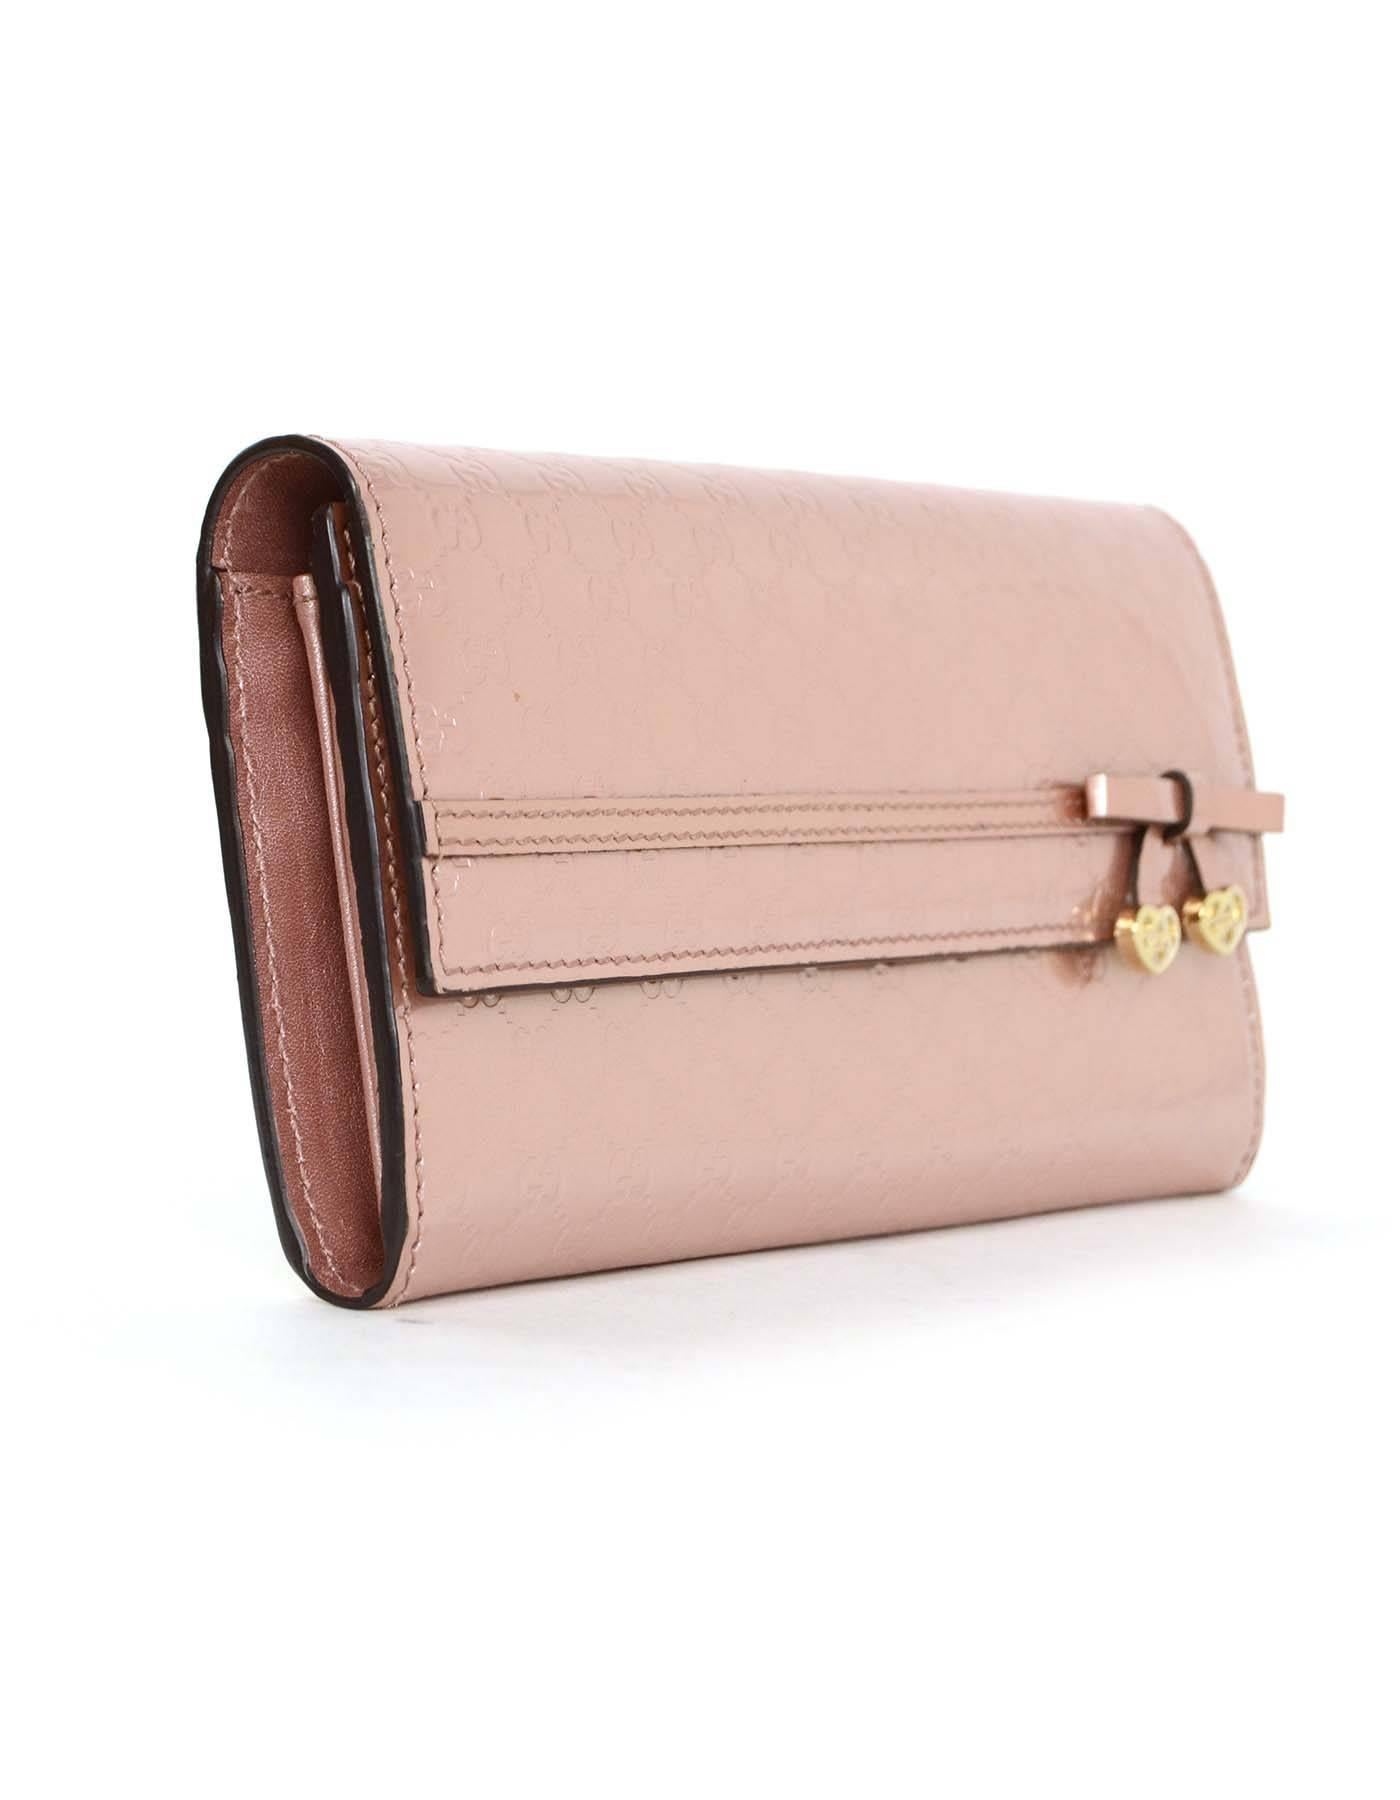 Features bow detail with goldtone logo engraved hearts

-Made In: Italy
-Color: Champagne pink
-Materials: Patent leather and metal
-Lining: Champagne pink leather
-Closure/Opening: Flap snap
-Exterior Pockets: None
-Interior Pockets: One